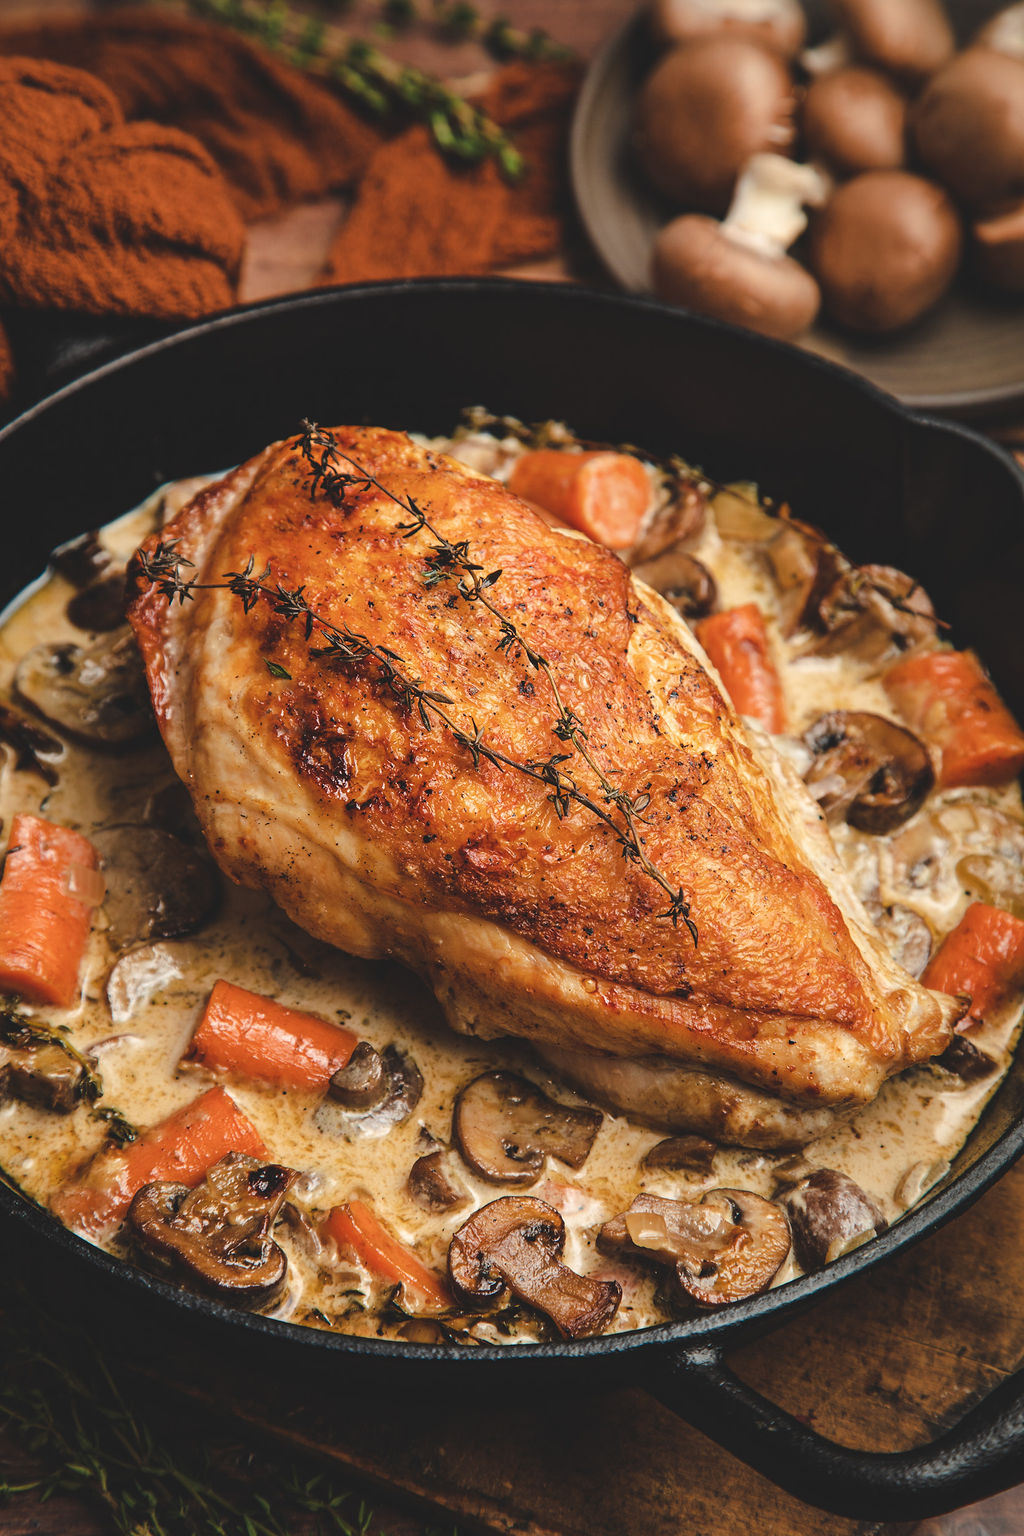 Dindon au Riesling recipe, comprised of turkey breast, sauteed vegetables, in a creamy white wine sauce.